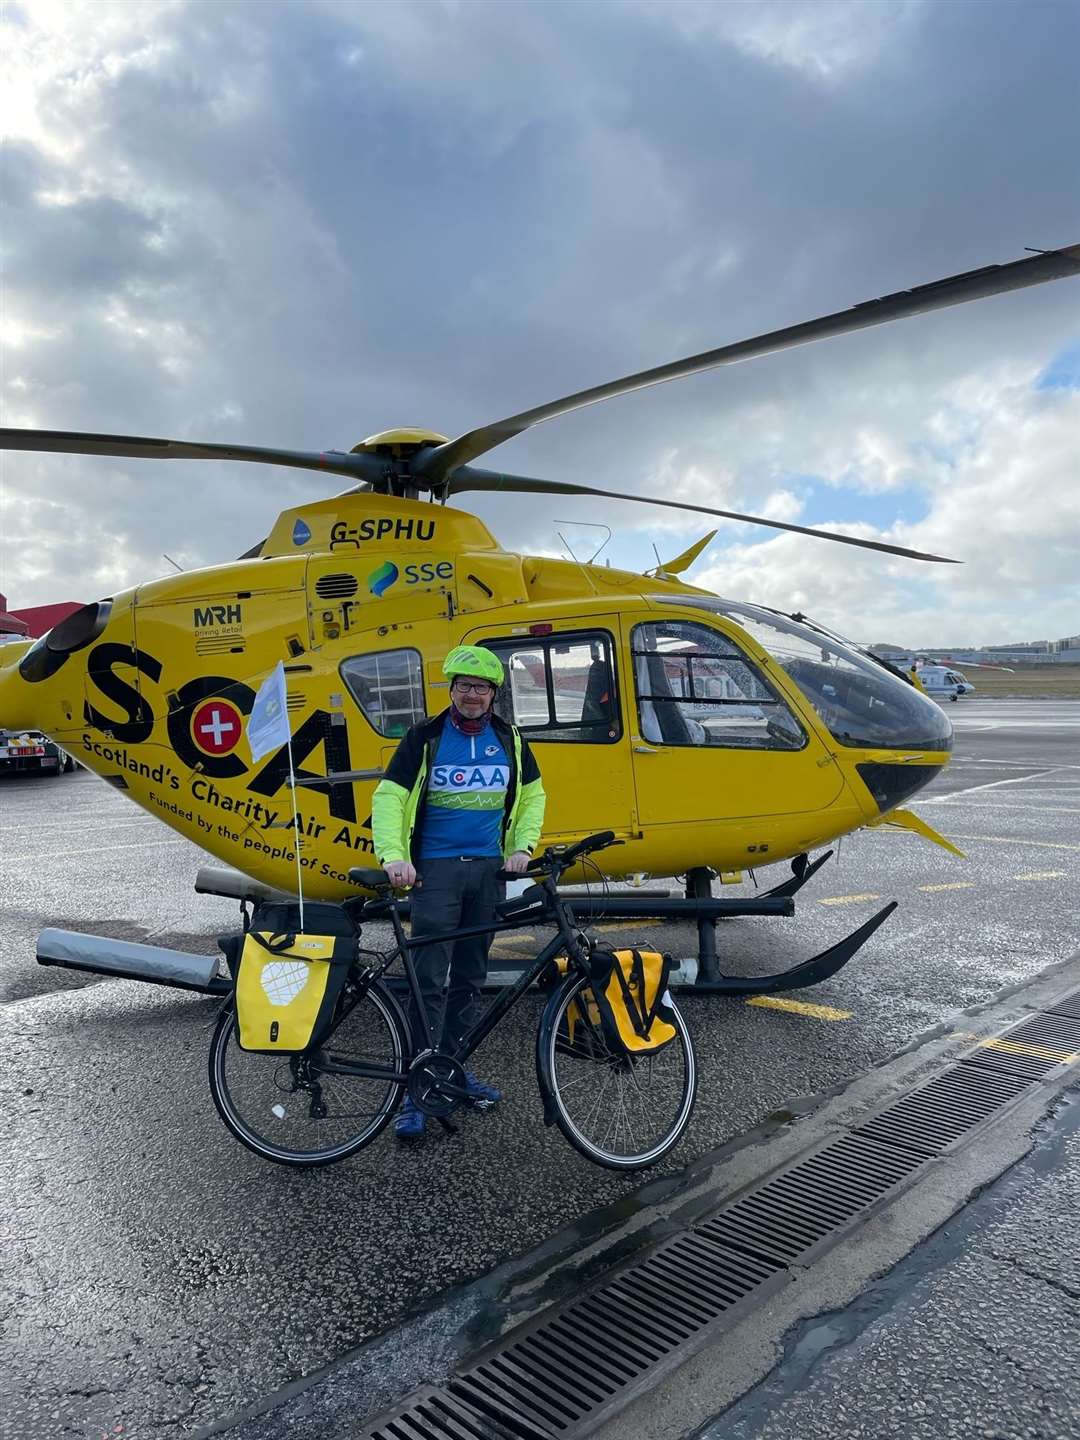 Barry Watt is to cycle from Land's End to John O' Groats to raise money for Scotland's charity air ambulance.